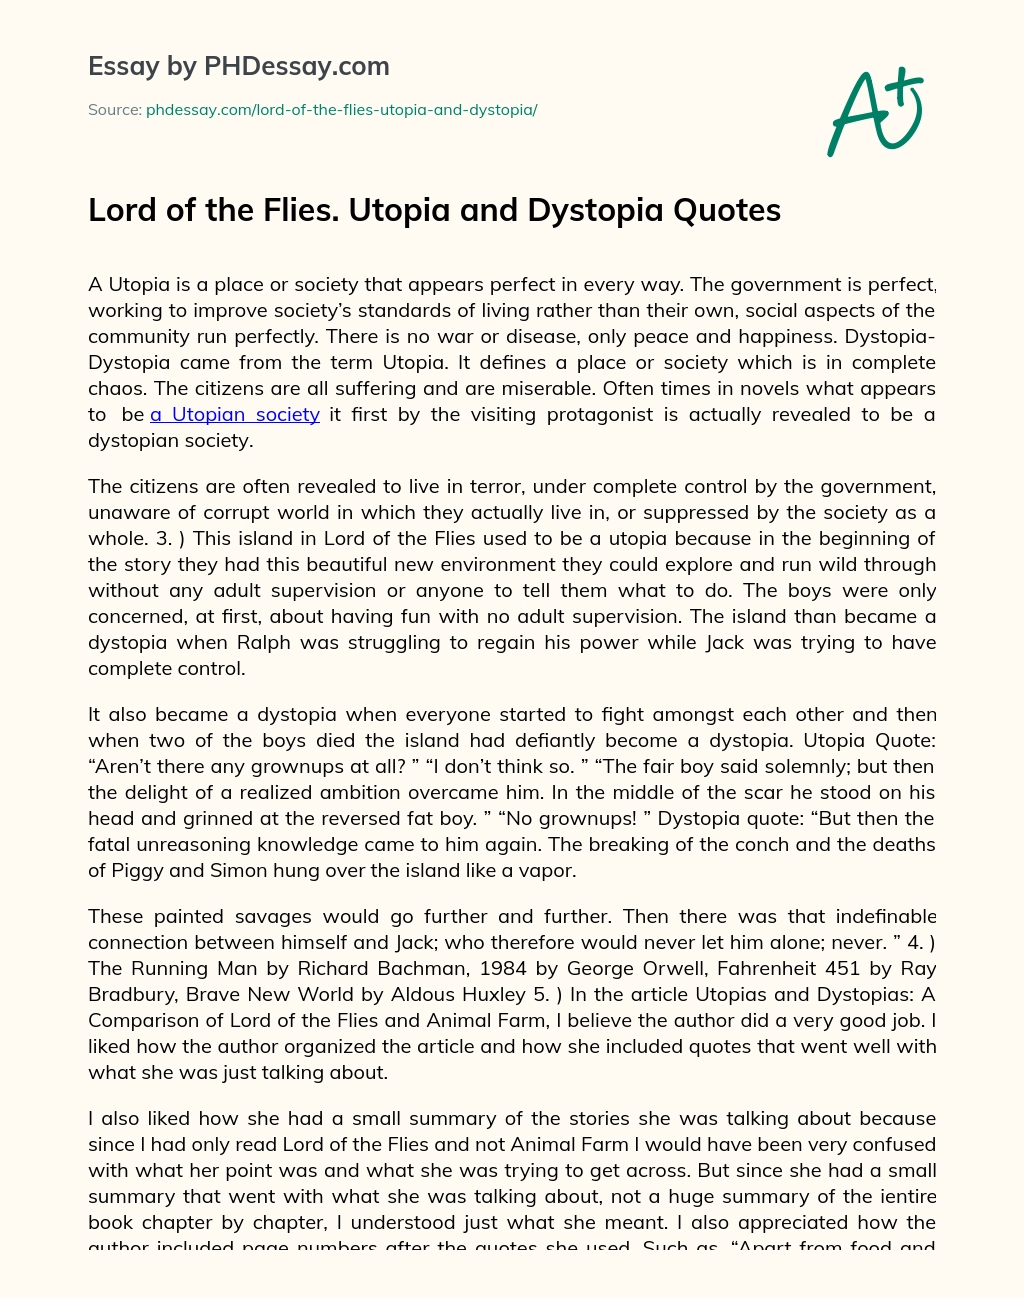 Lord of the Flies. Utopia and Dystopia Quotes essay